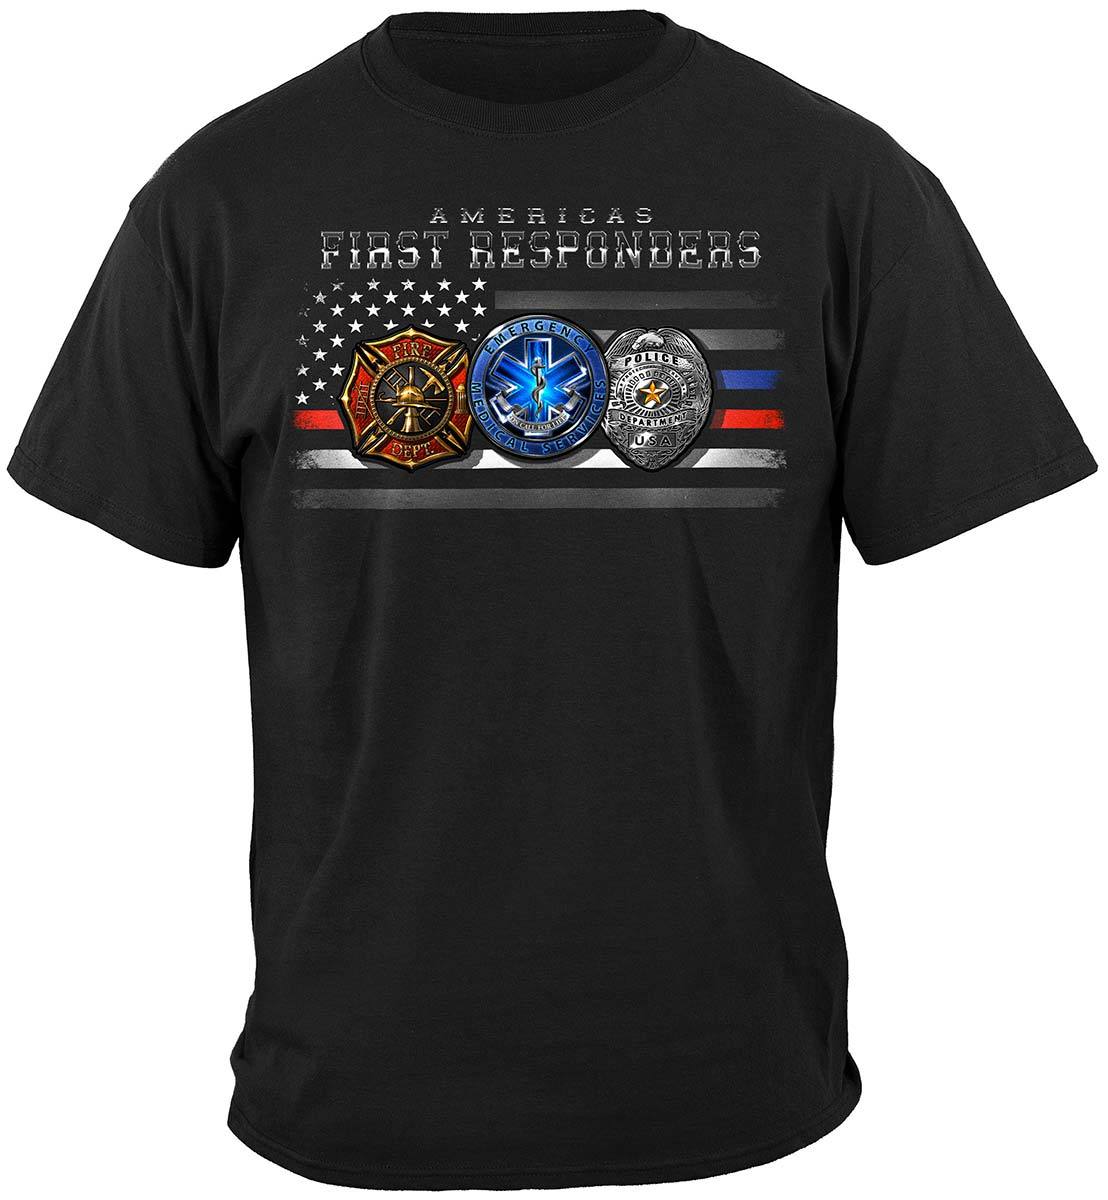 First Responder Flag of Honor Premium Hooded Sweat Shirt